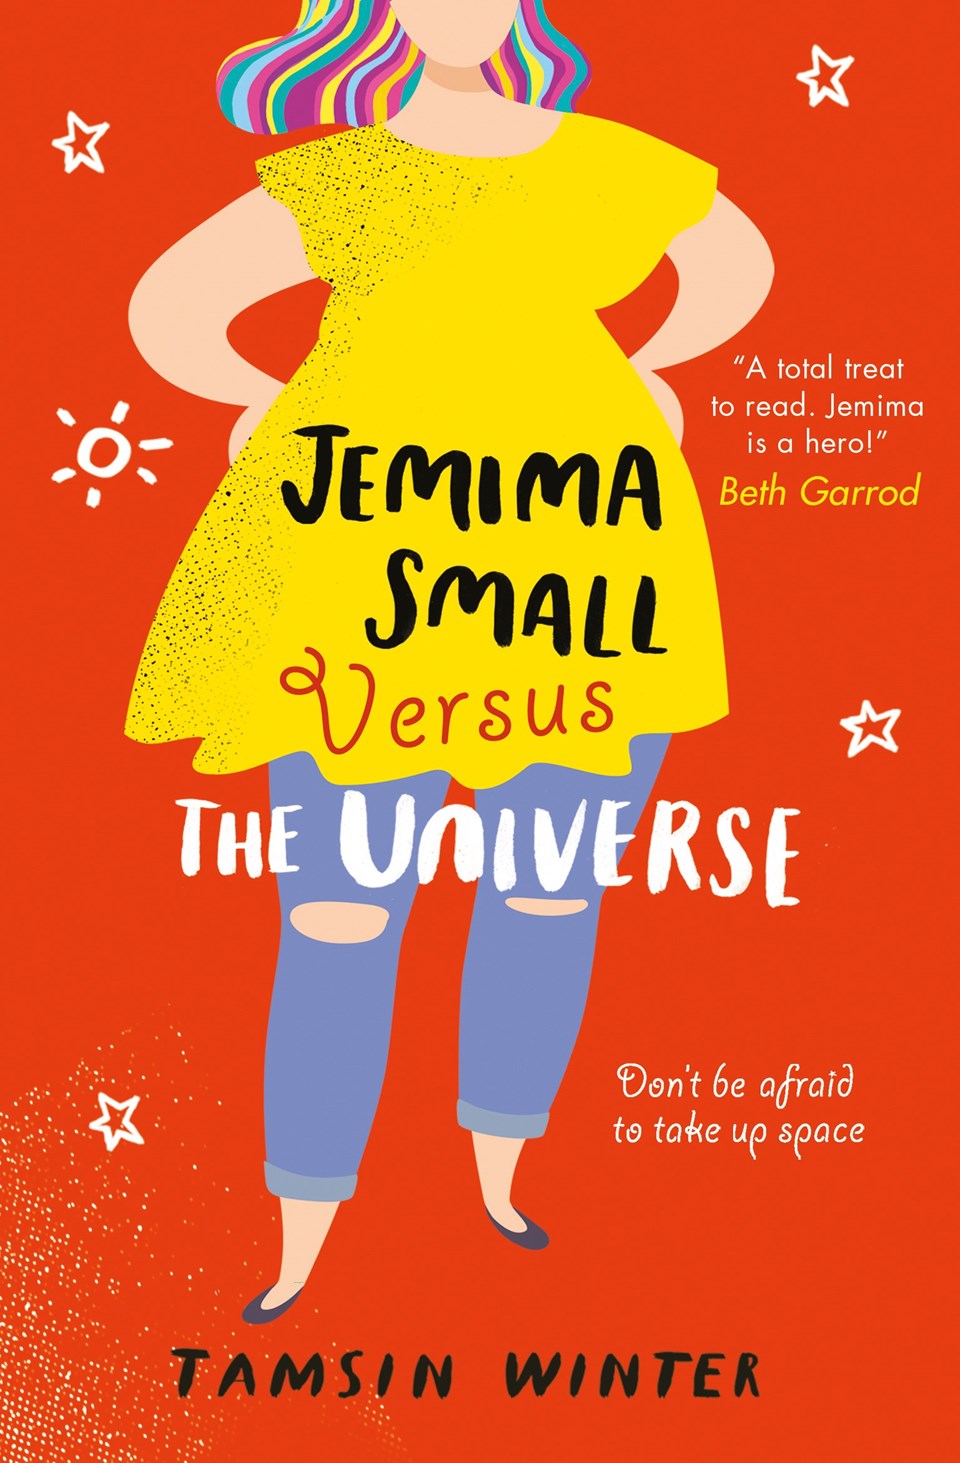 Jemima Small Versus the Universe – Q&A with Tamsin Winter